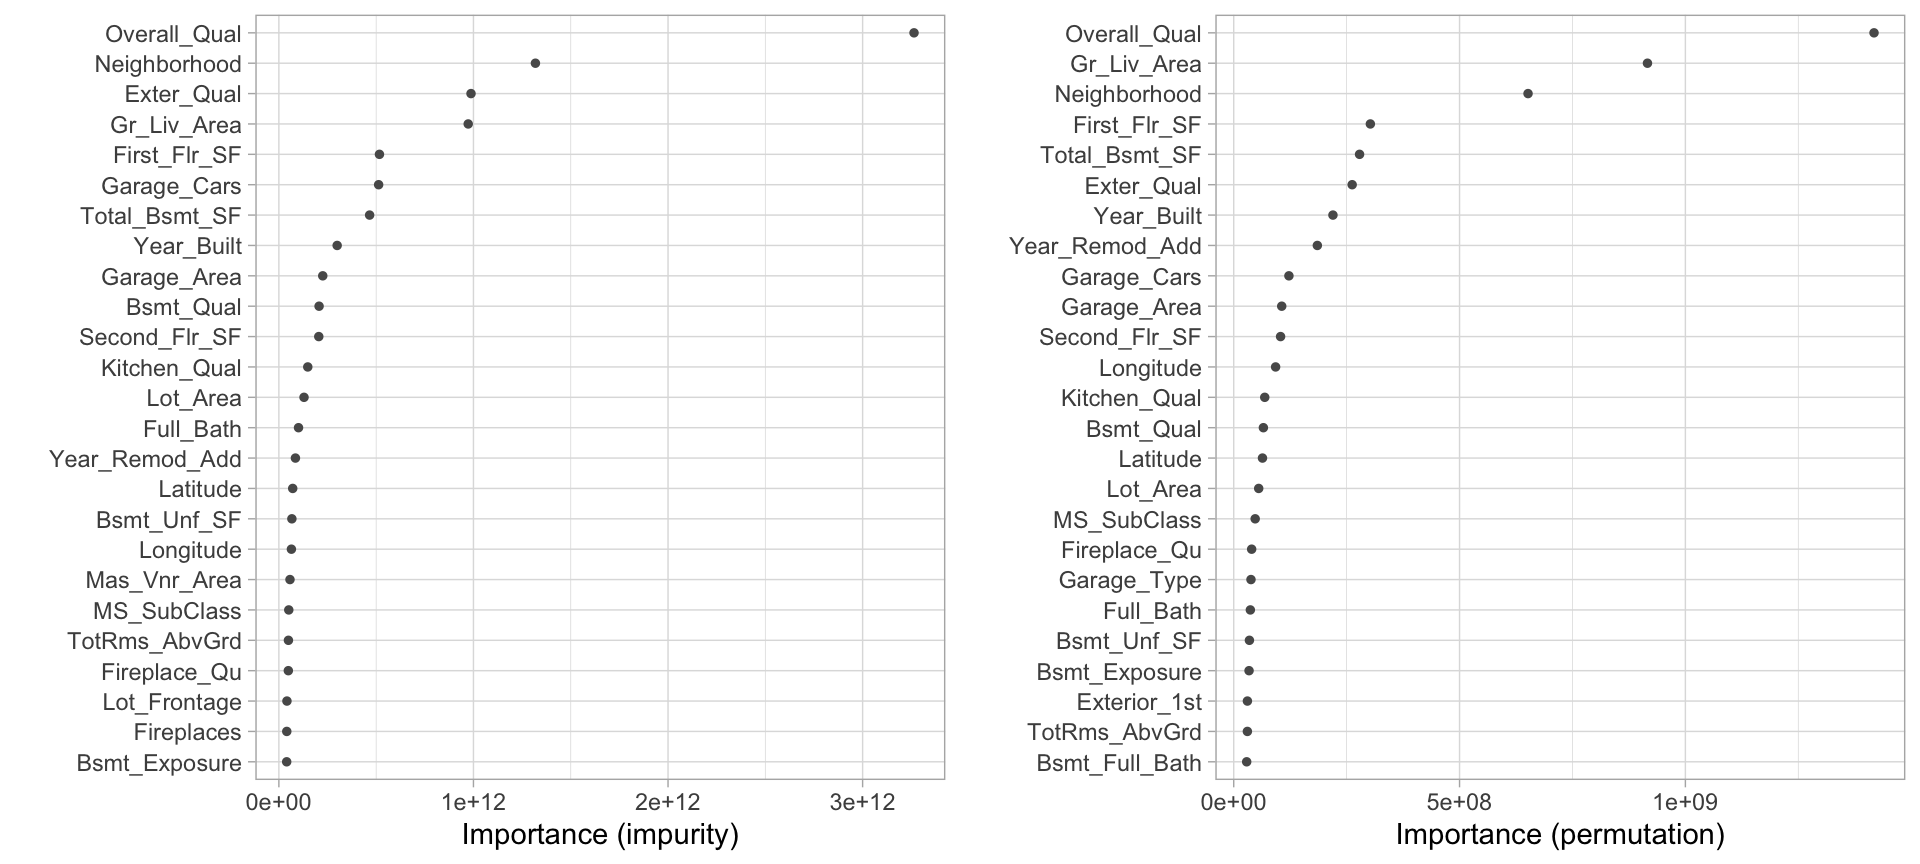 Top 25 most important variables based on impurity (left) and permutation (right).